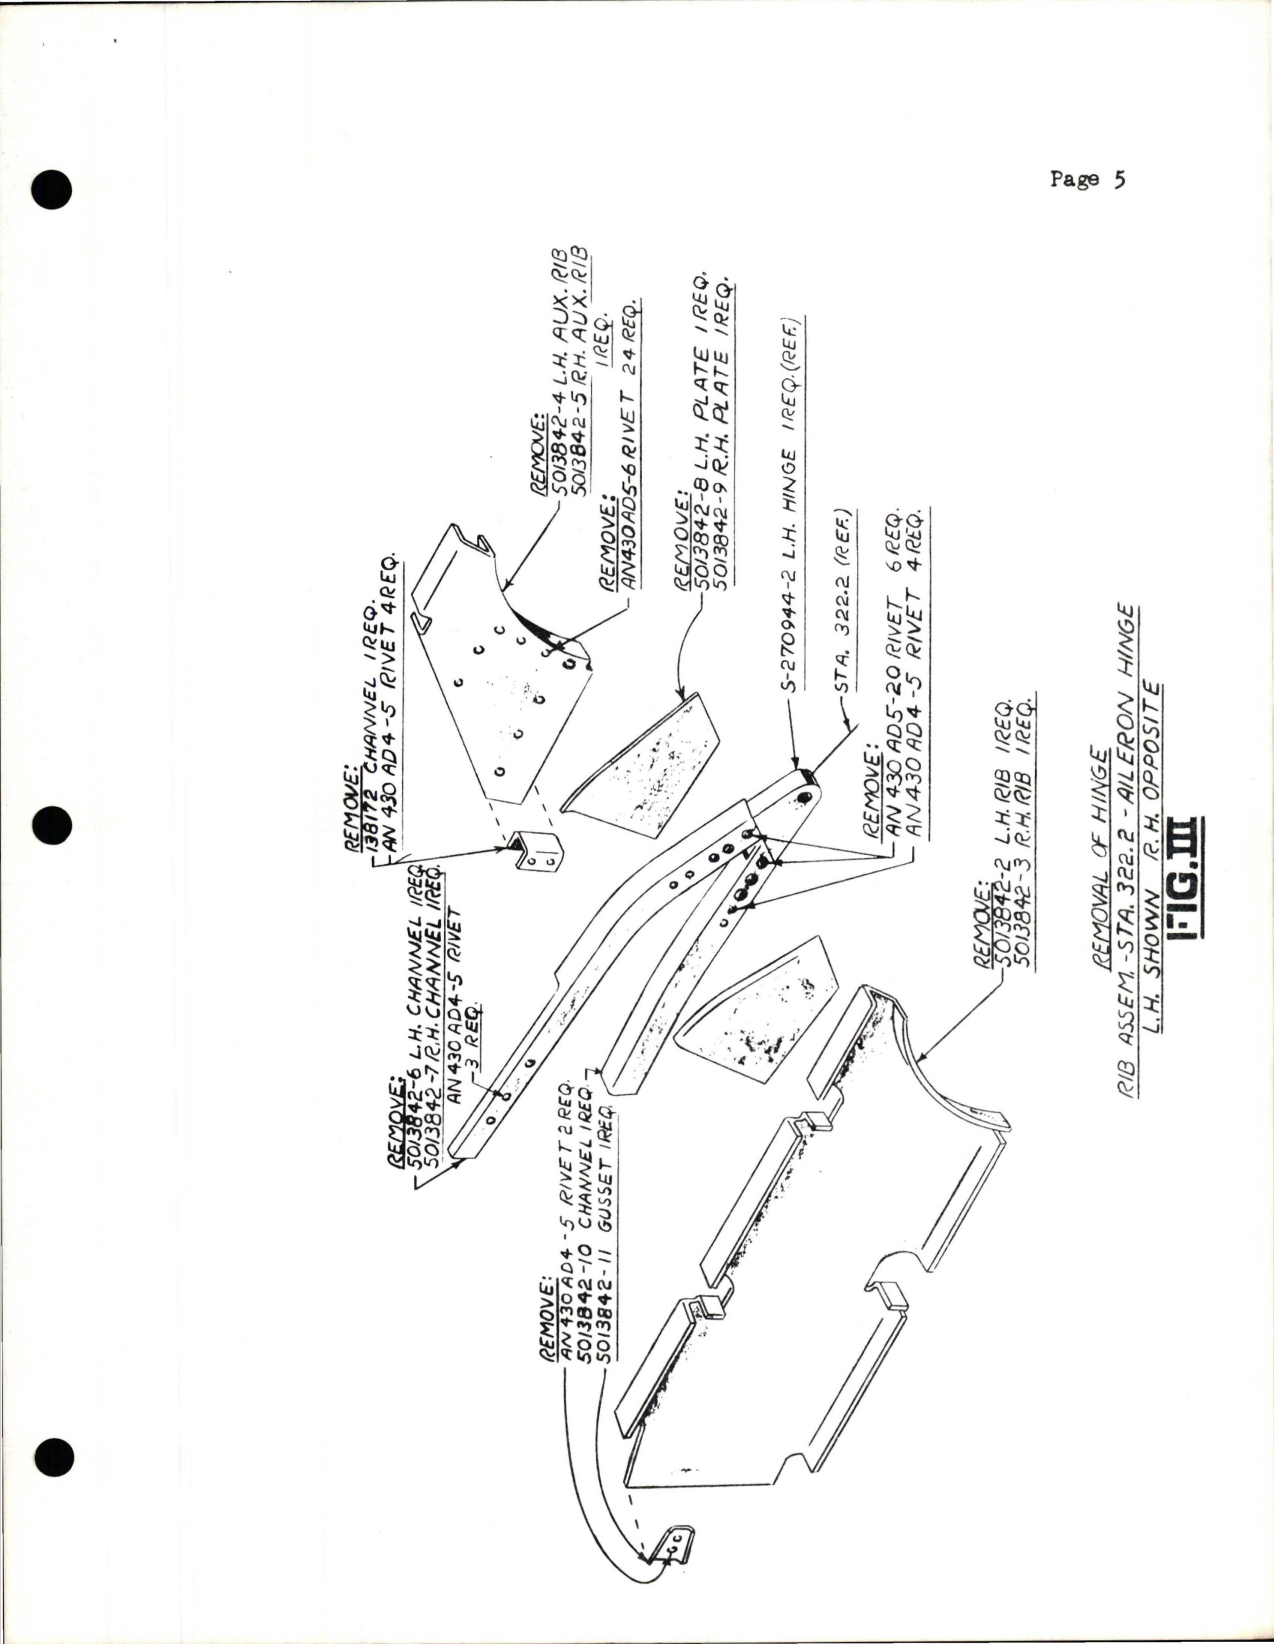 Sample page 5 from AirCorps Library document: Reinforcement of Aileron Hinges